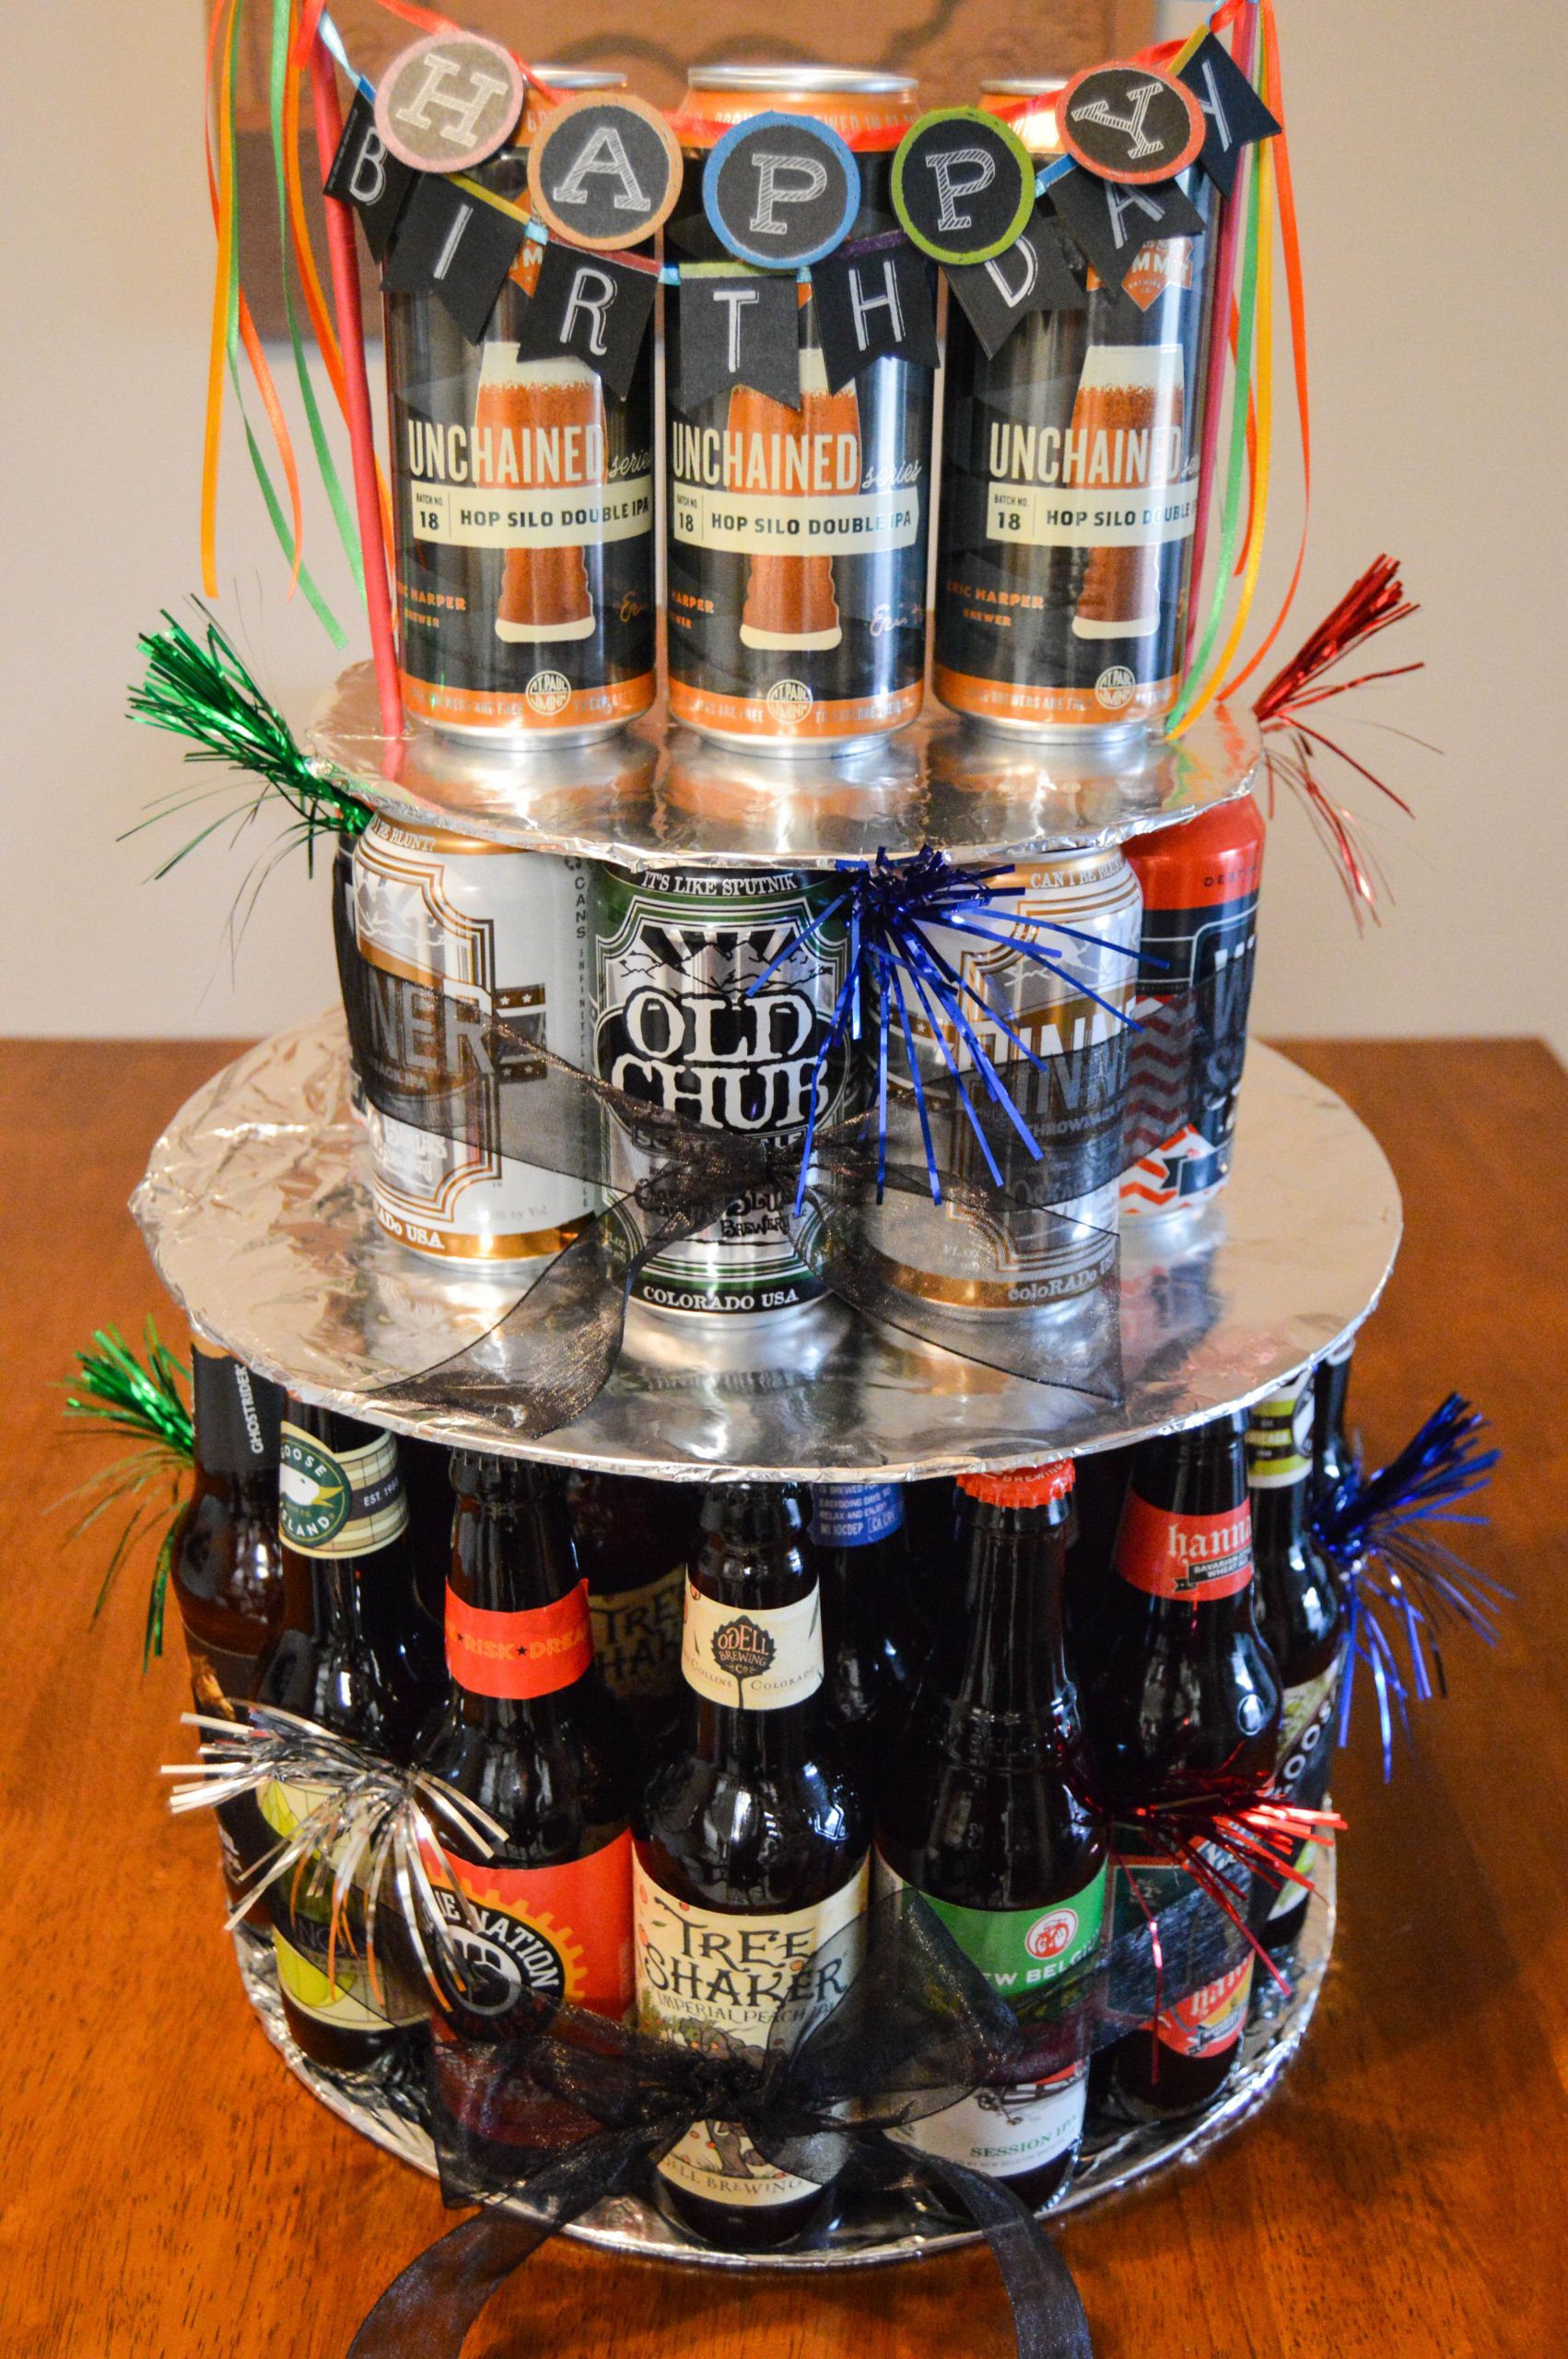 Birthday Cake Beer
 How to Make a Beer Bottle or Can Birthday Cake